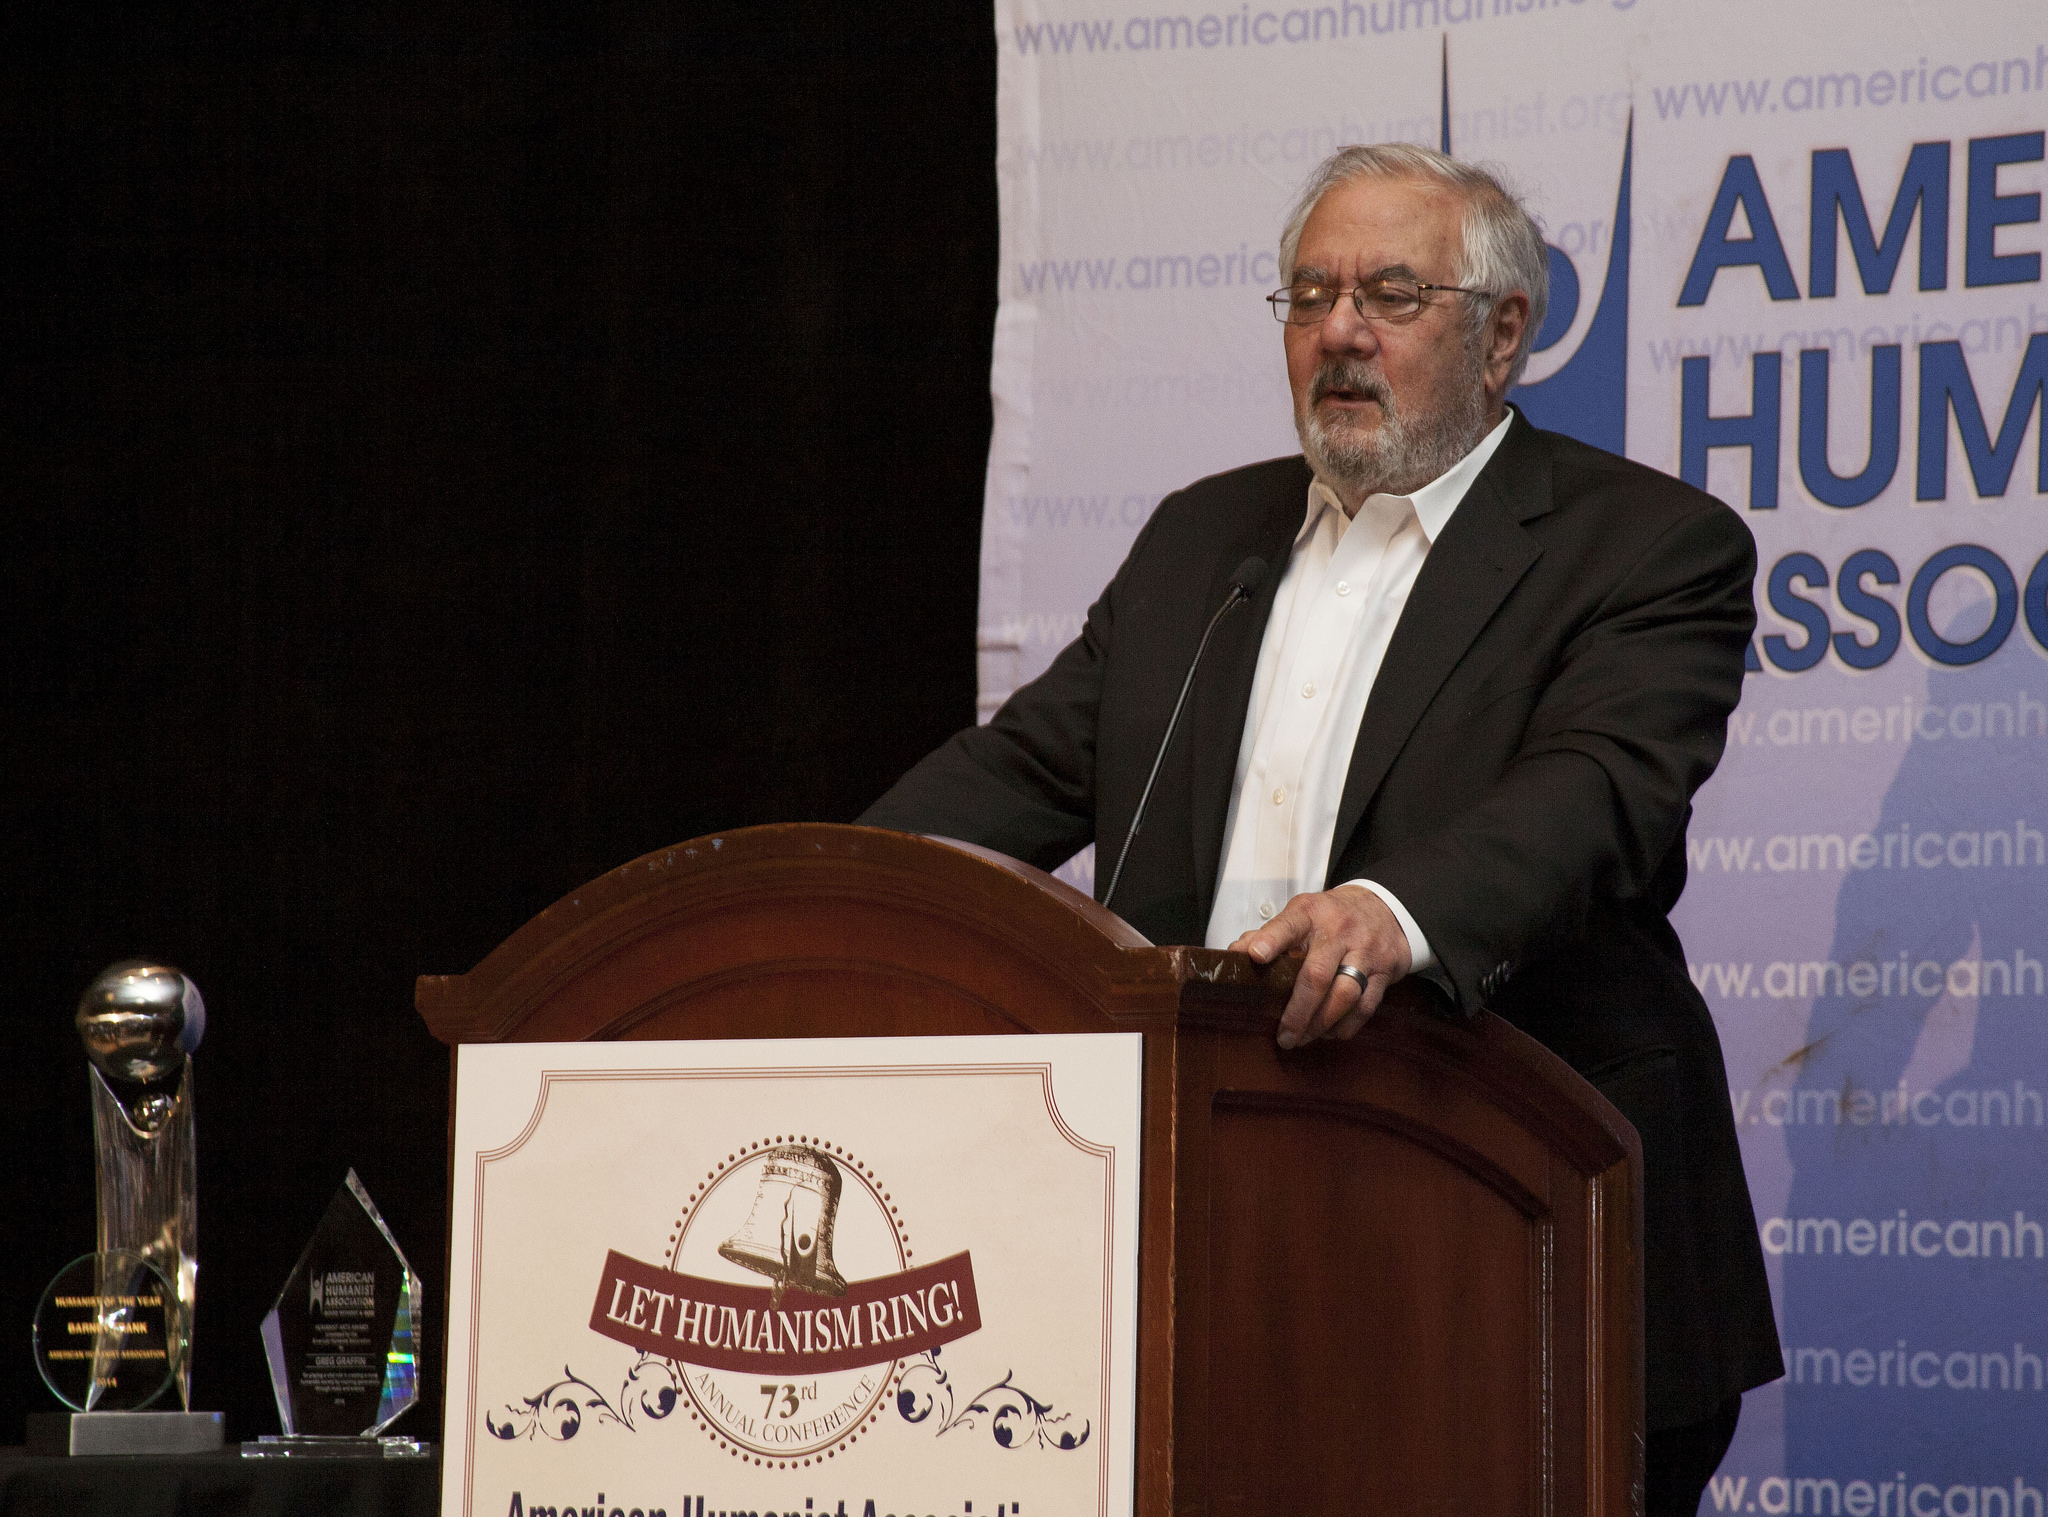 2014 Humanist of the Year, Barney Frank